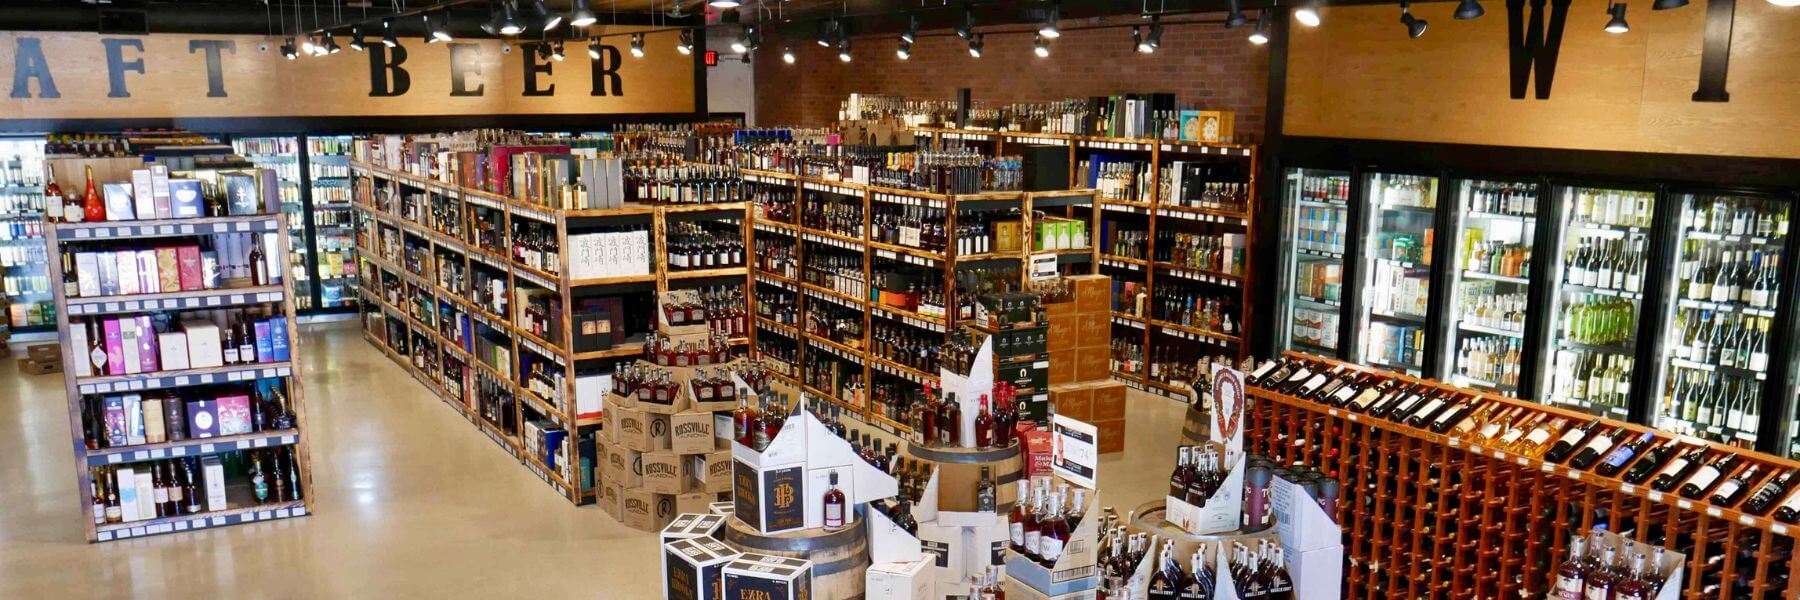 Vintage Wines and Spirits Store